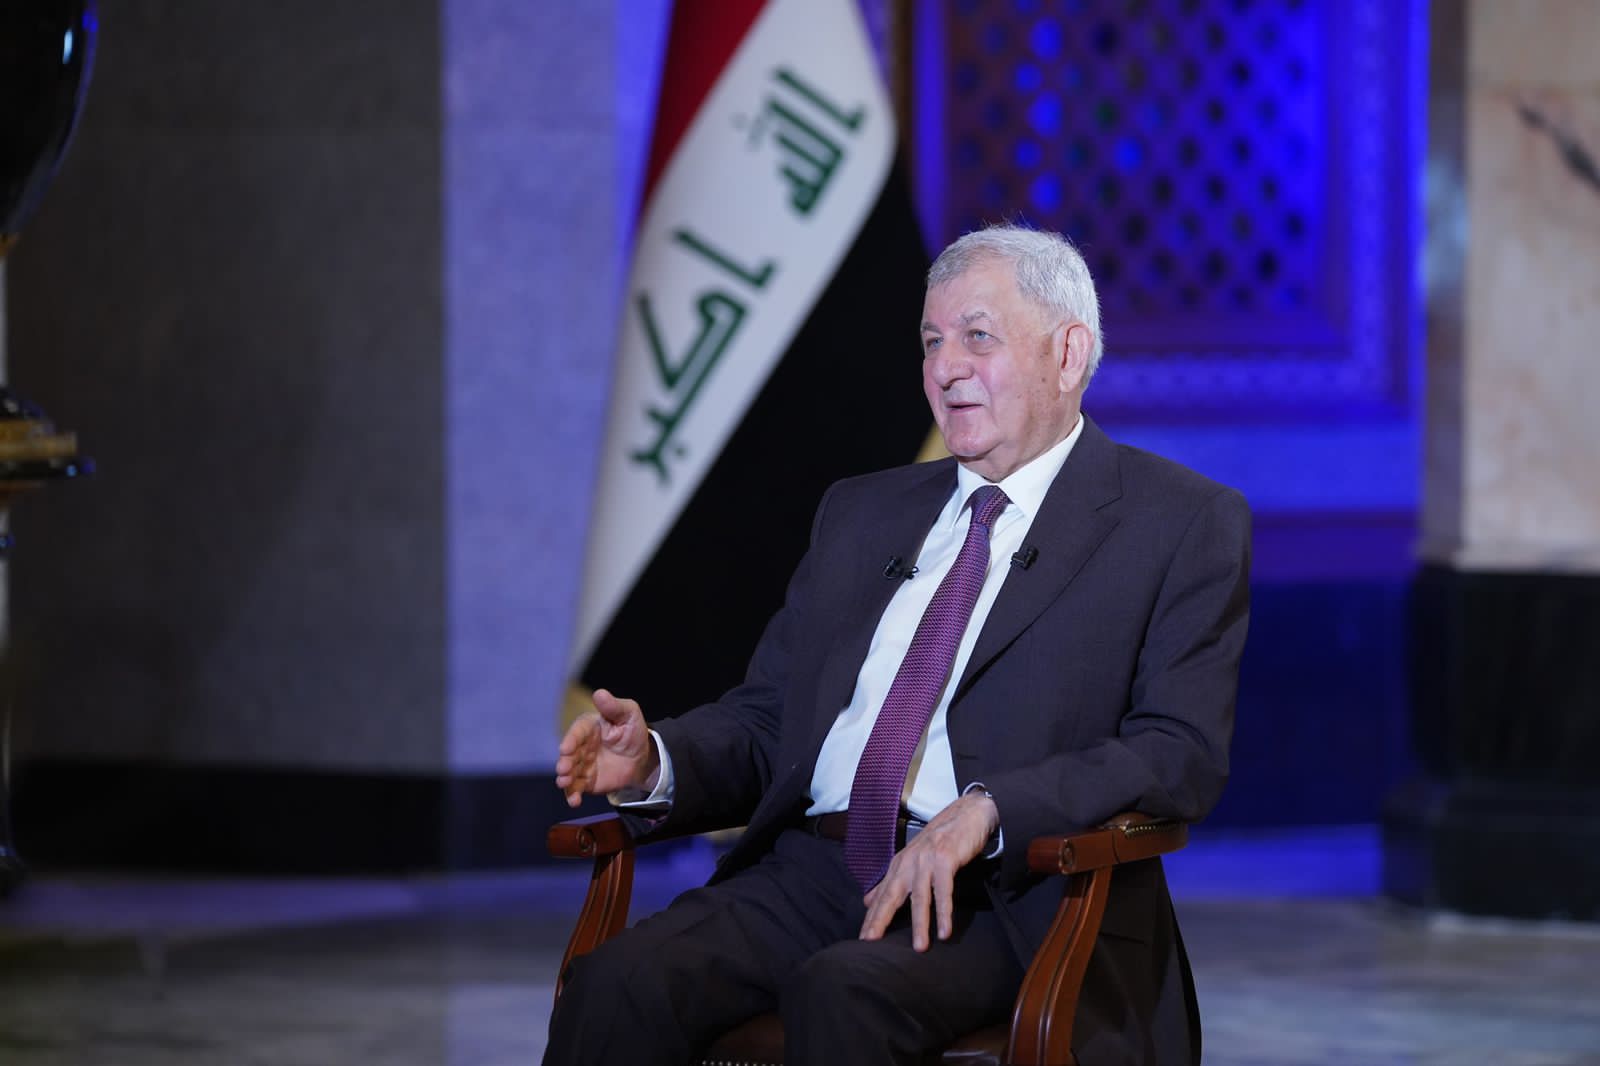 The Iraqi President draws the form of the relationship with America, Iran and Saudi Arabia and presents his proposals for the problems of Baghdad, Erbil and Kirkuk